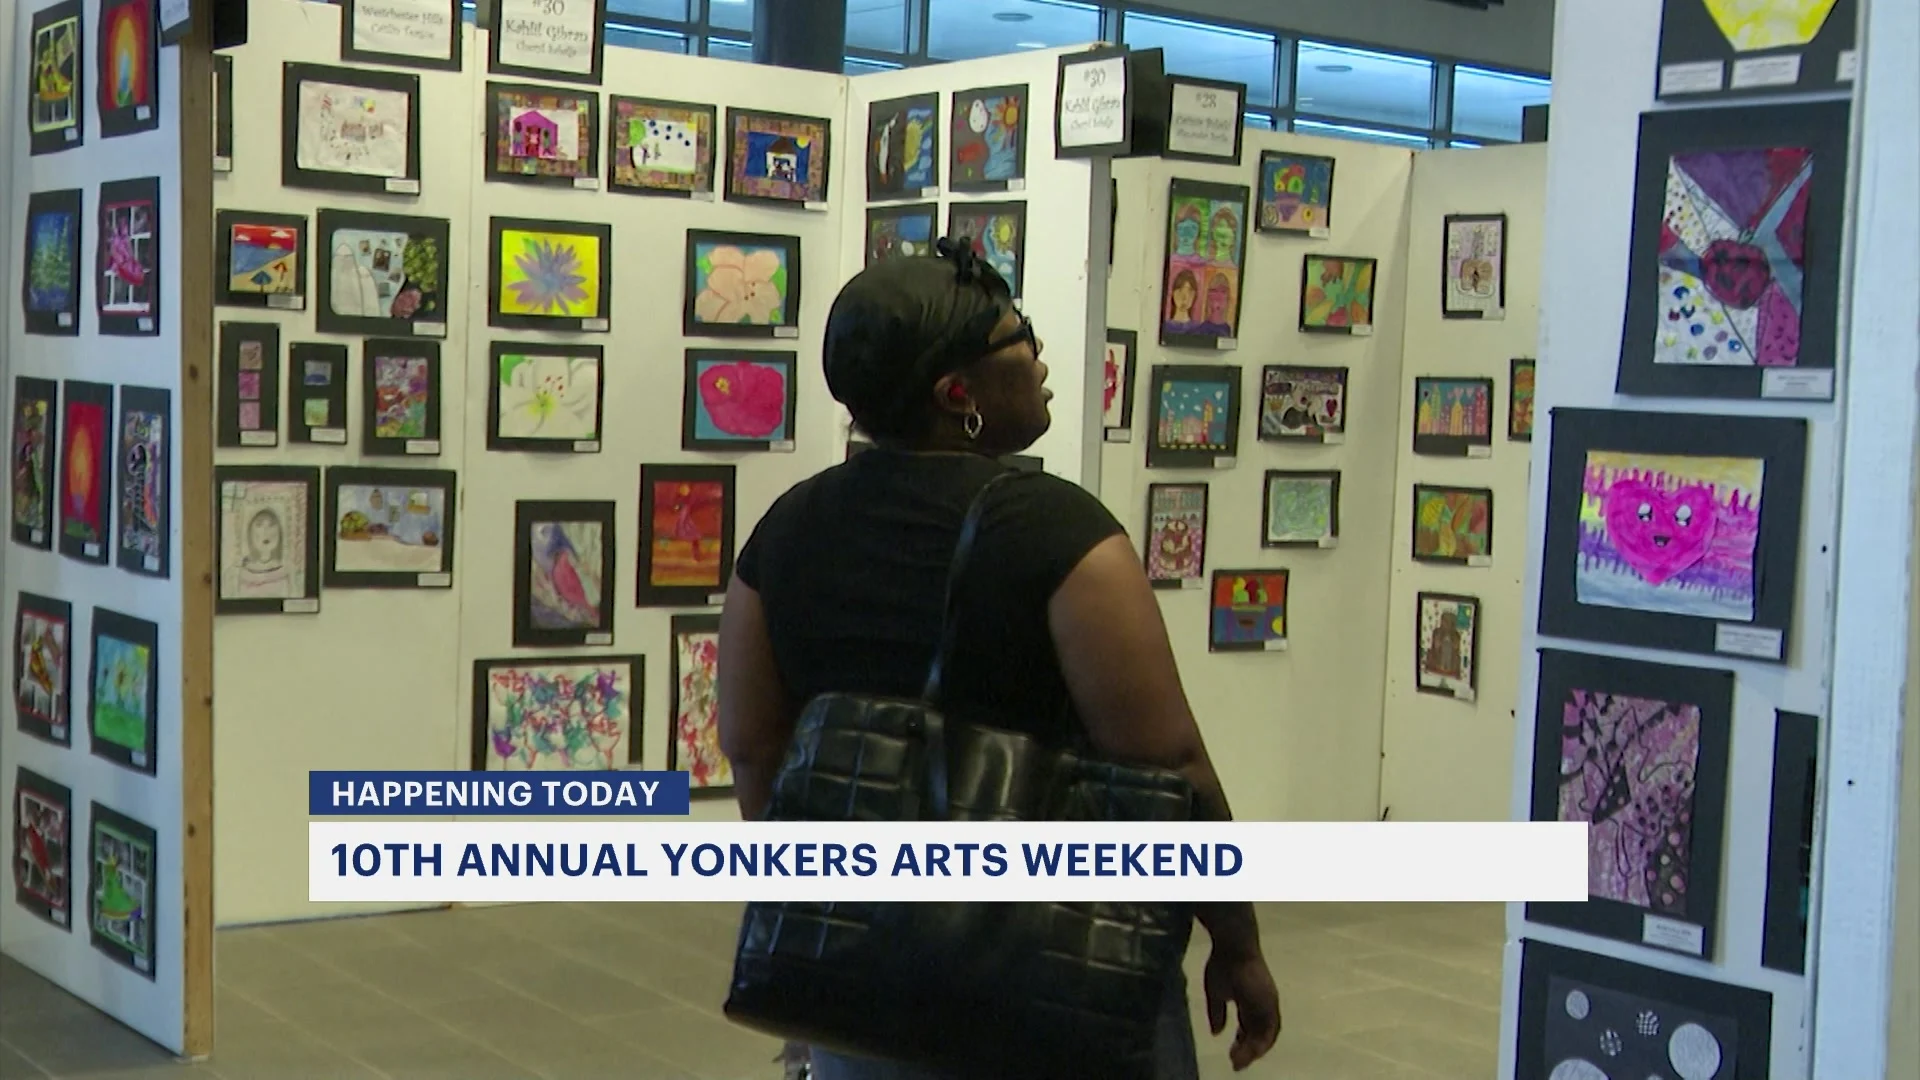 Yonkers Arts Weekend marks its 10th year of exhibits and performances